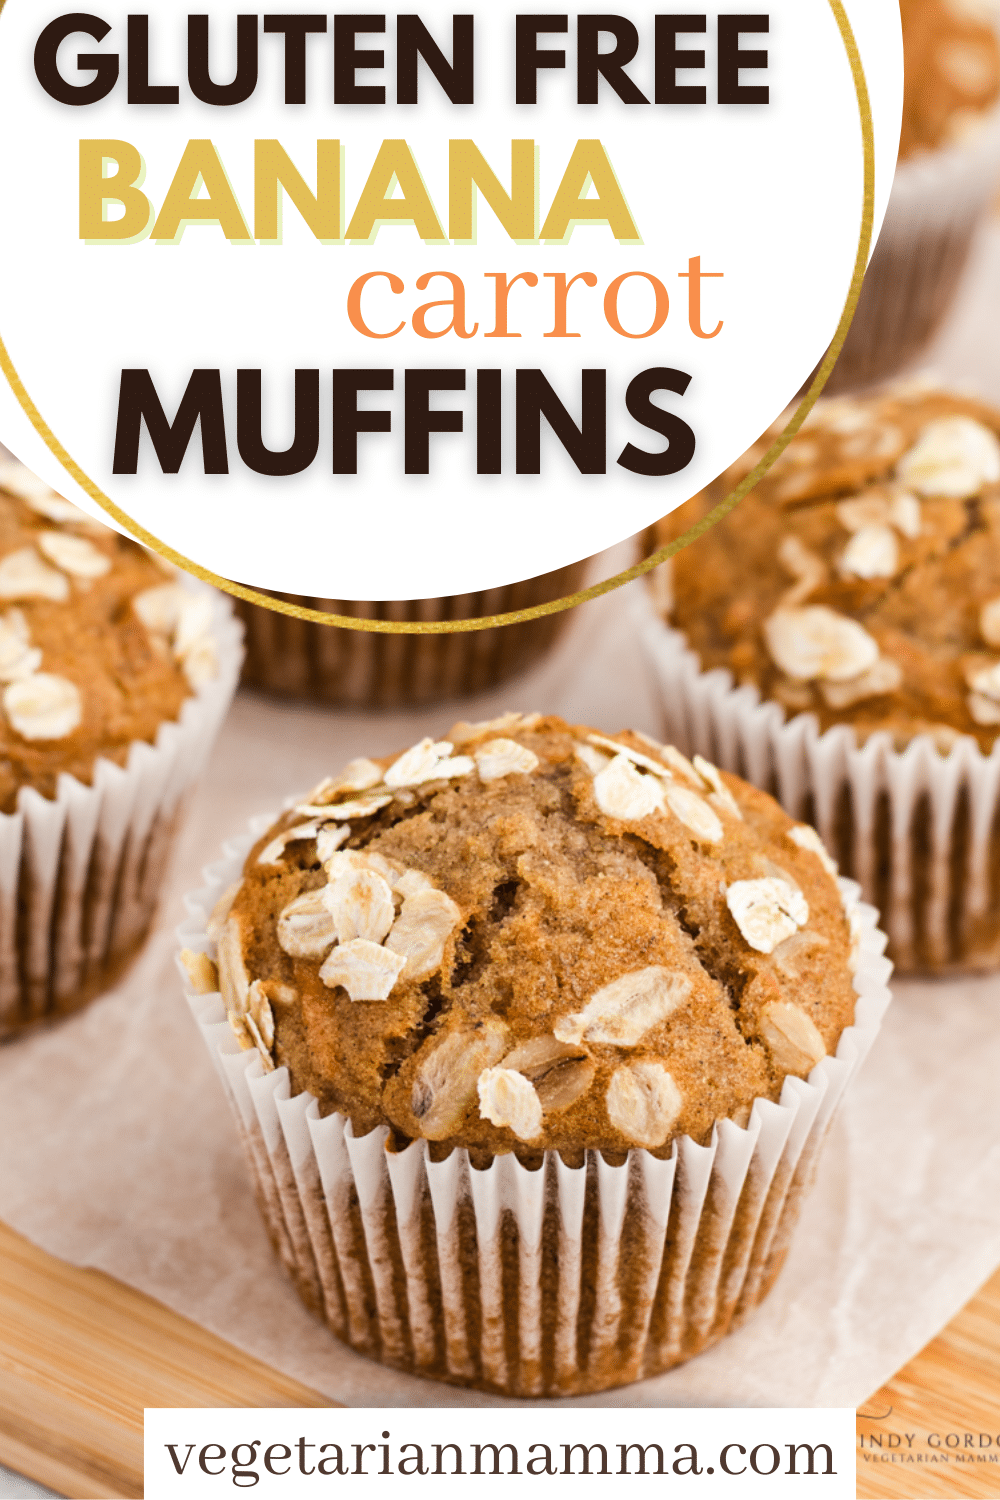 bread and carrot cake! If you love that combo, you will love these light and fluffy Banana Carrot Muffins. #banana #carrot #muffins #glutenfreemuffins #bananacarrotmuffins